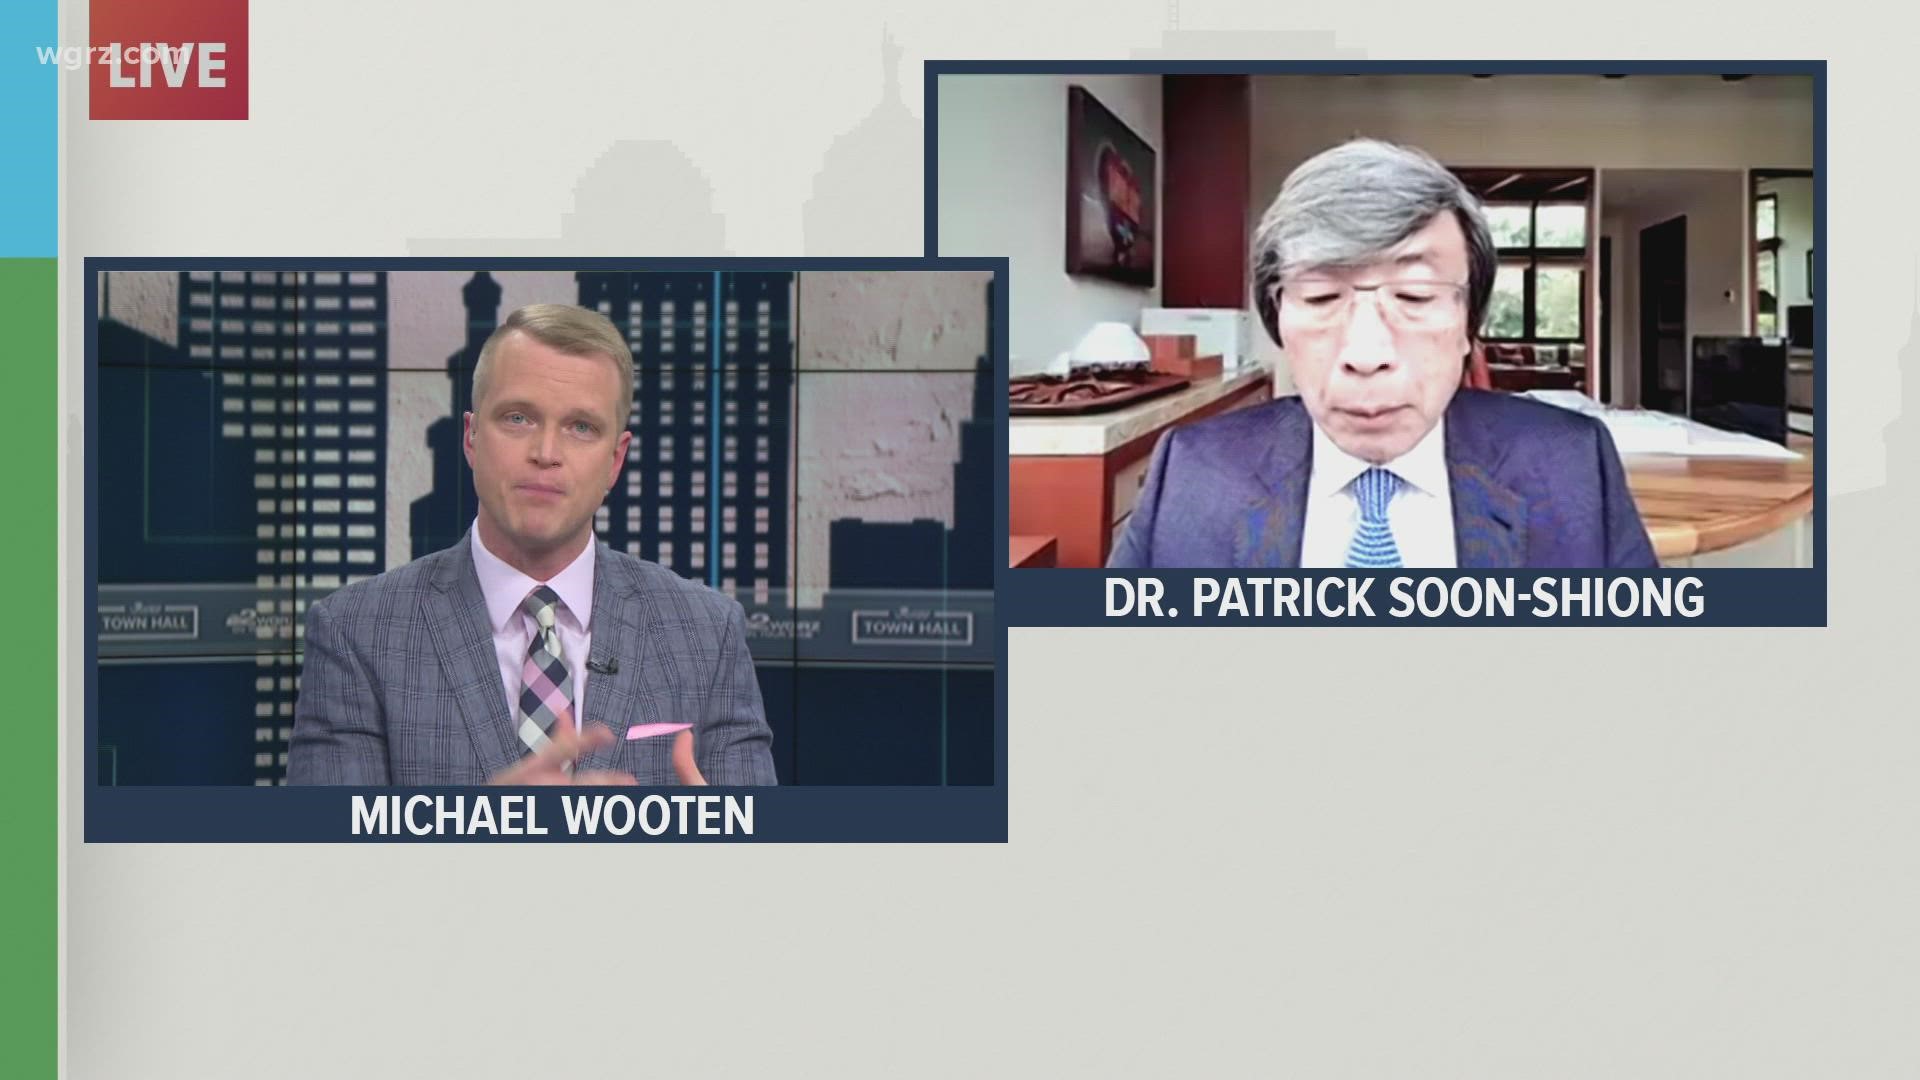 Dr. Patrick Soon-Shiong founder of ImmunityBio joins our Town Hall to discuss his company coming to Dunkirk.